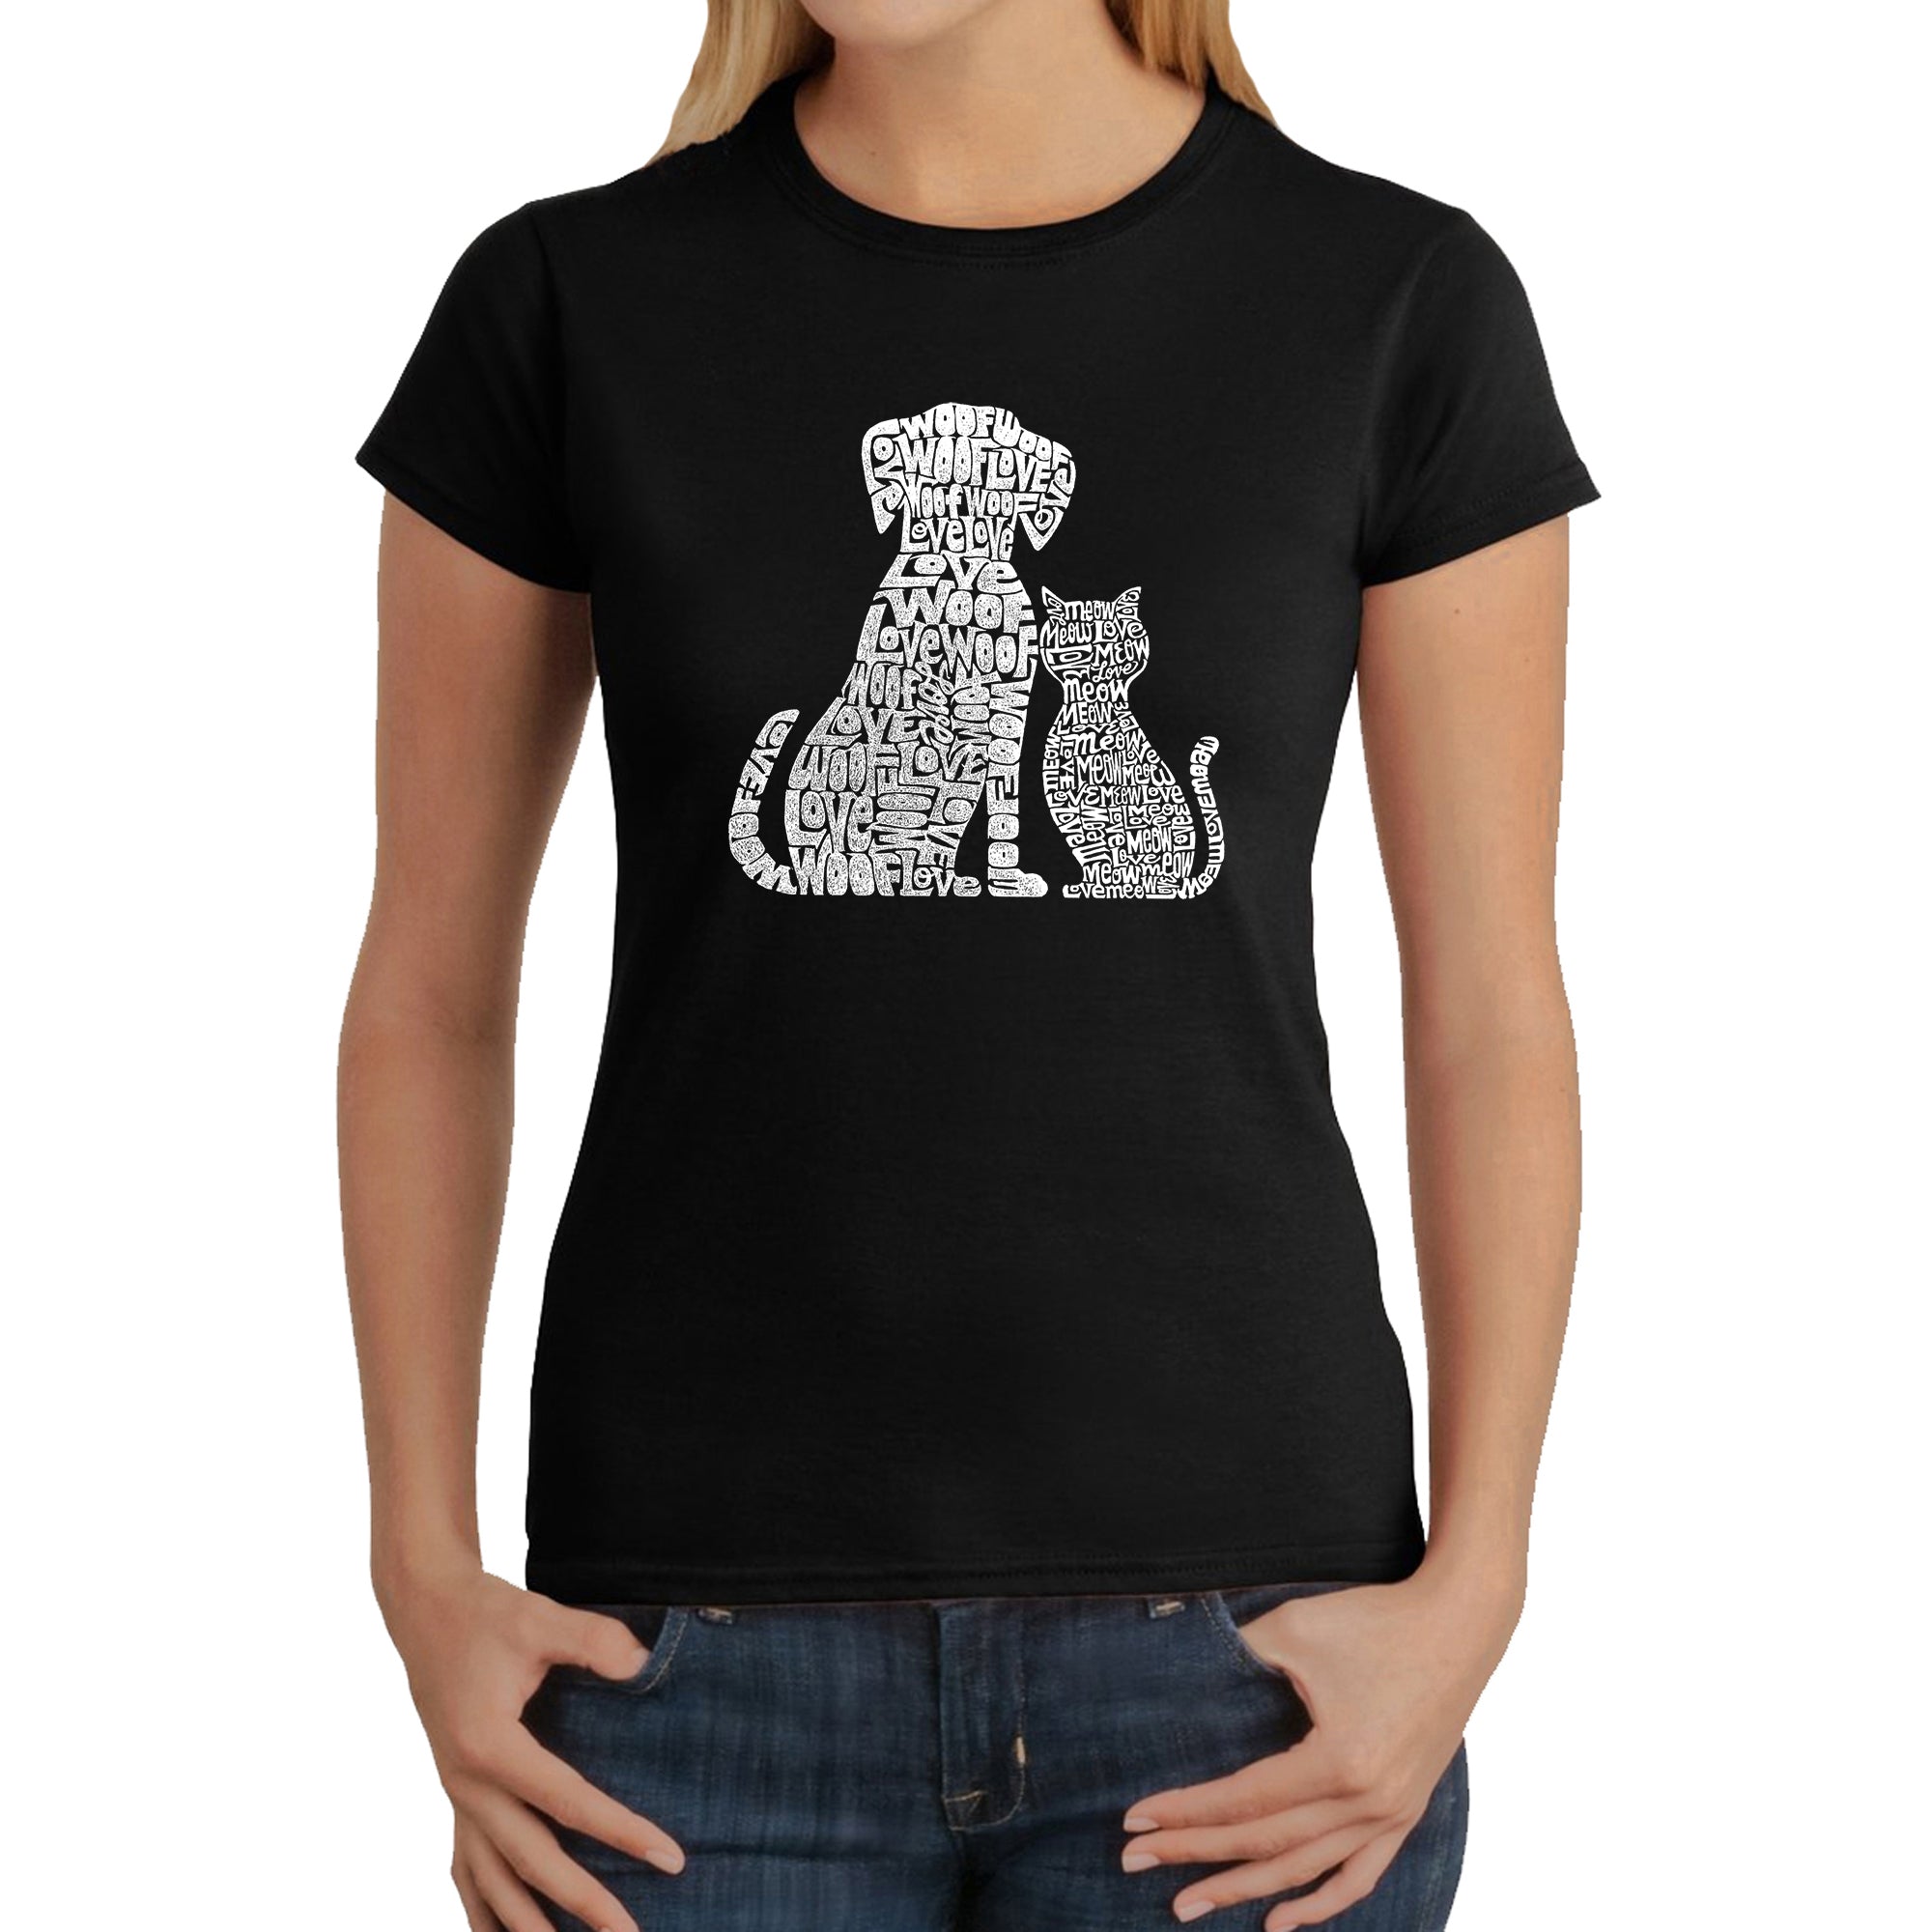 Dogs And Cats - Women's Word Art T-Shirt - Black - Small